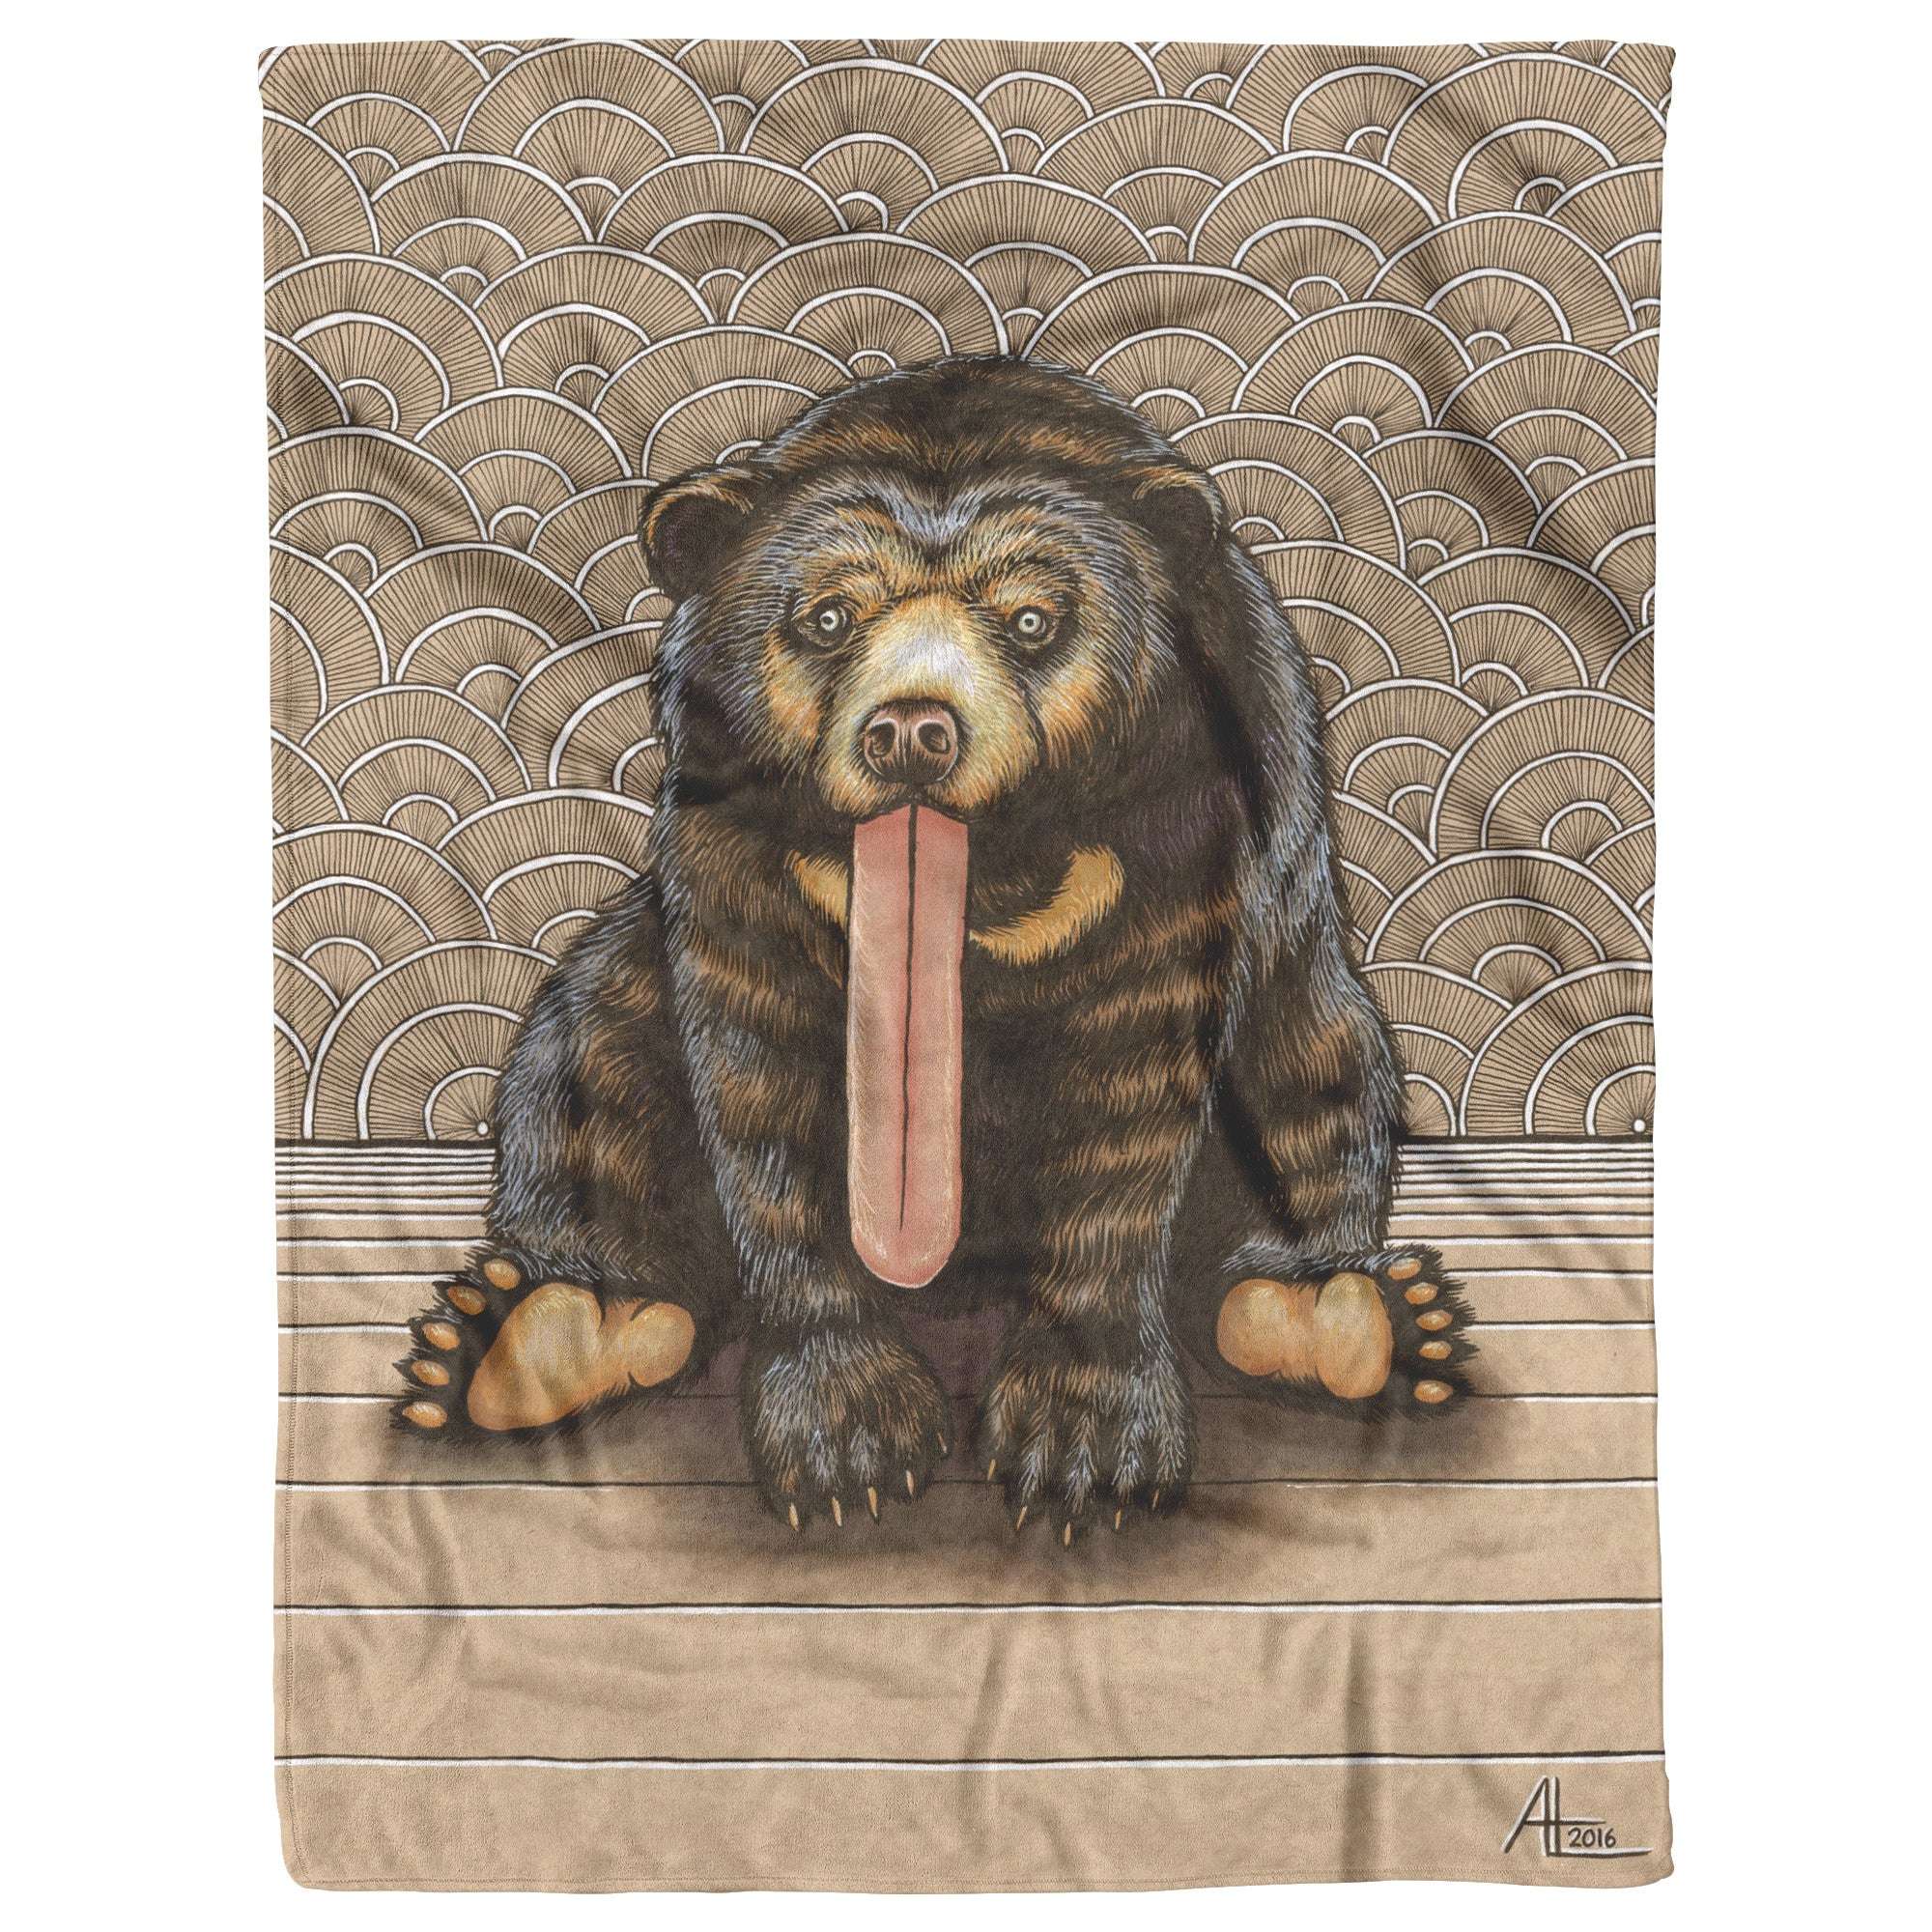 Illustration of a Sun Bear with a long tongue sitting down, against a patterned background featuring arch-like designs on a Sun Bear Blanket.